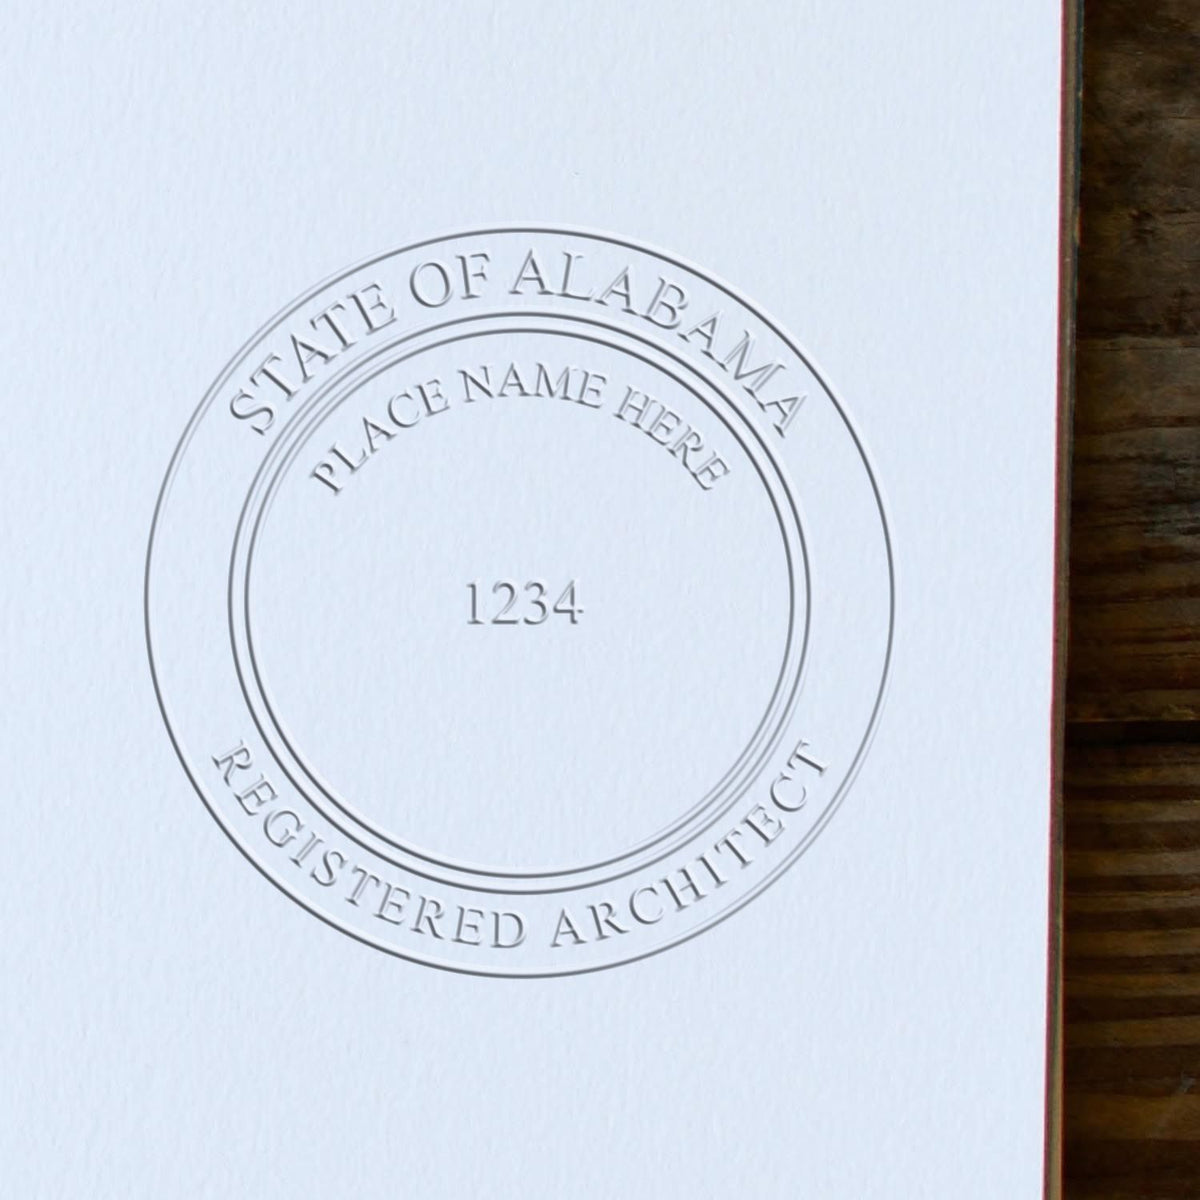 The Gift Alabama Architect Seal stamp impression comes to life with a crisp, detailed image stamped on paper - showcasing true professional quality.